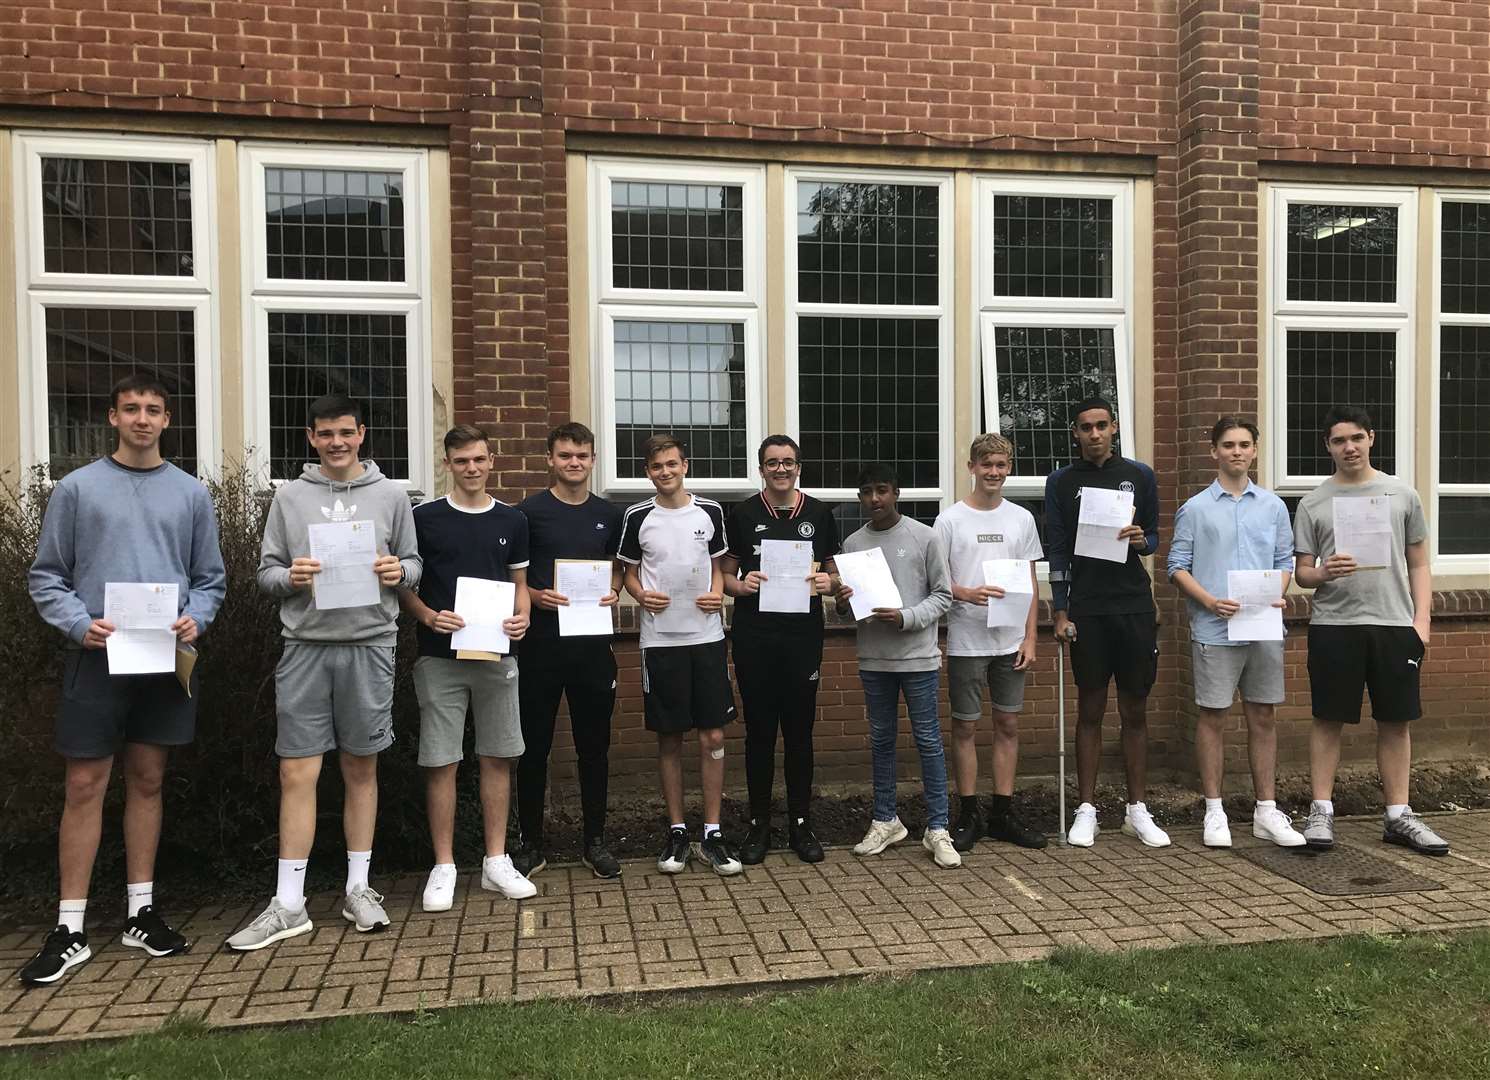 Maidstone Grammar School pupils collect their GCSE results this morning